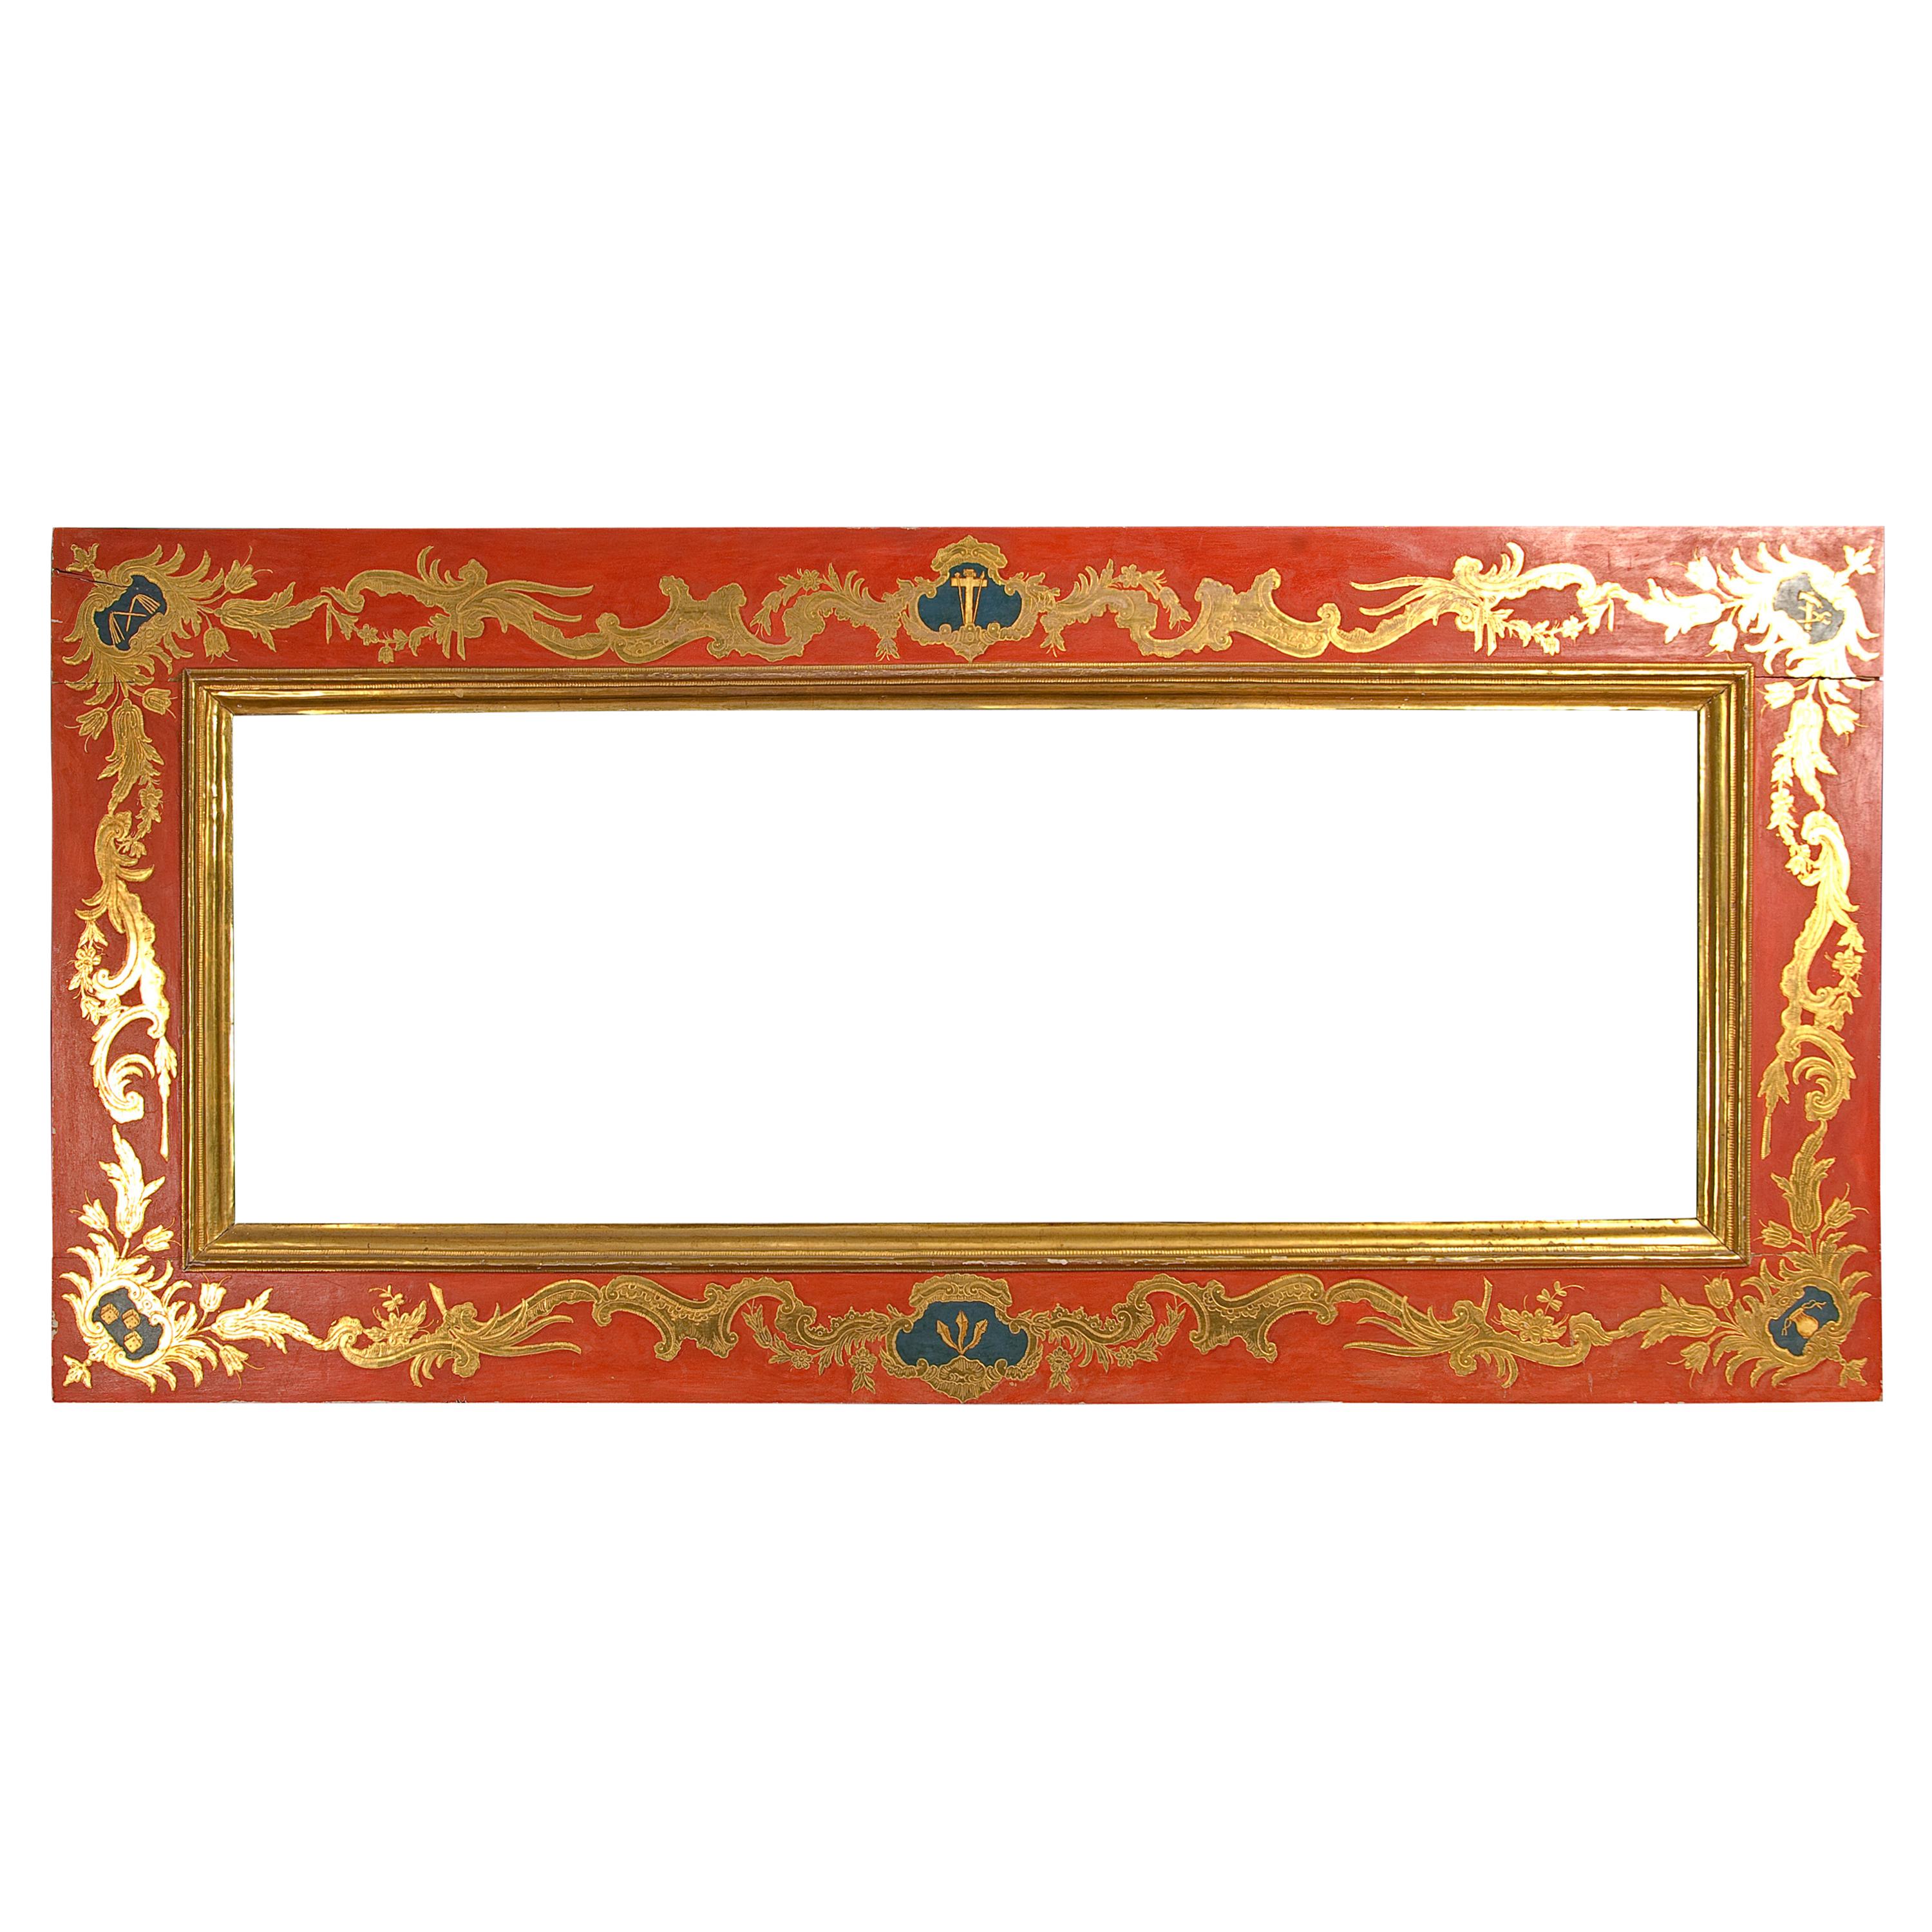 Frame, Polychromed and Giltwood, 18th Century